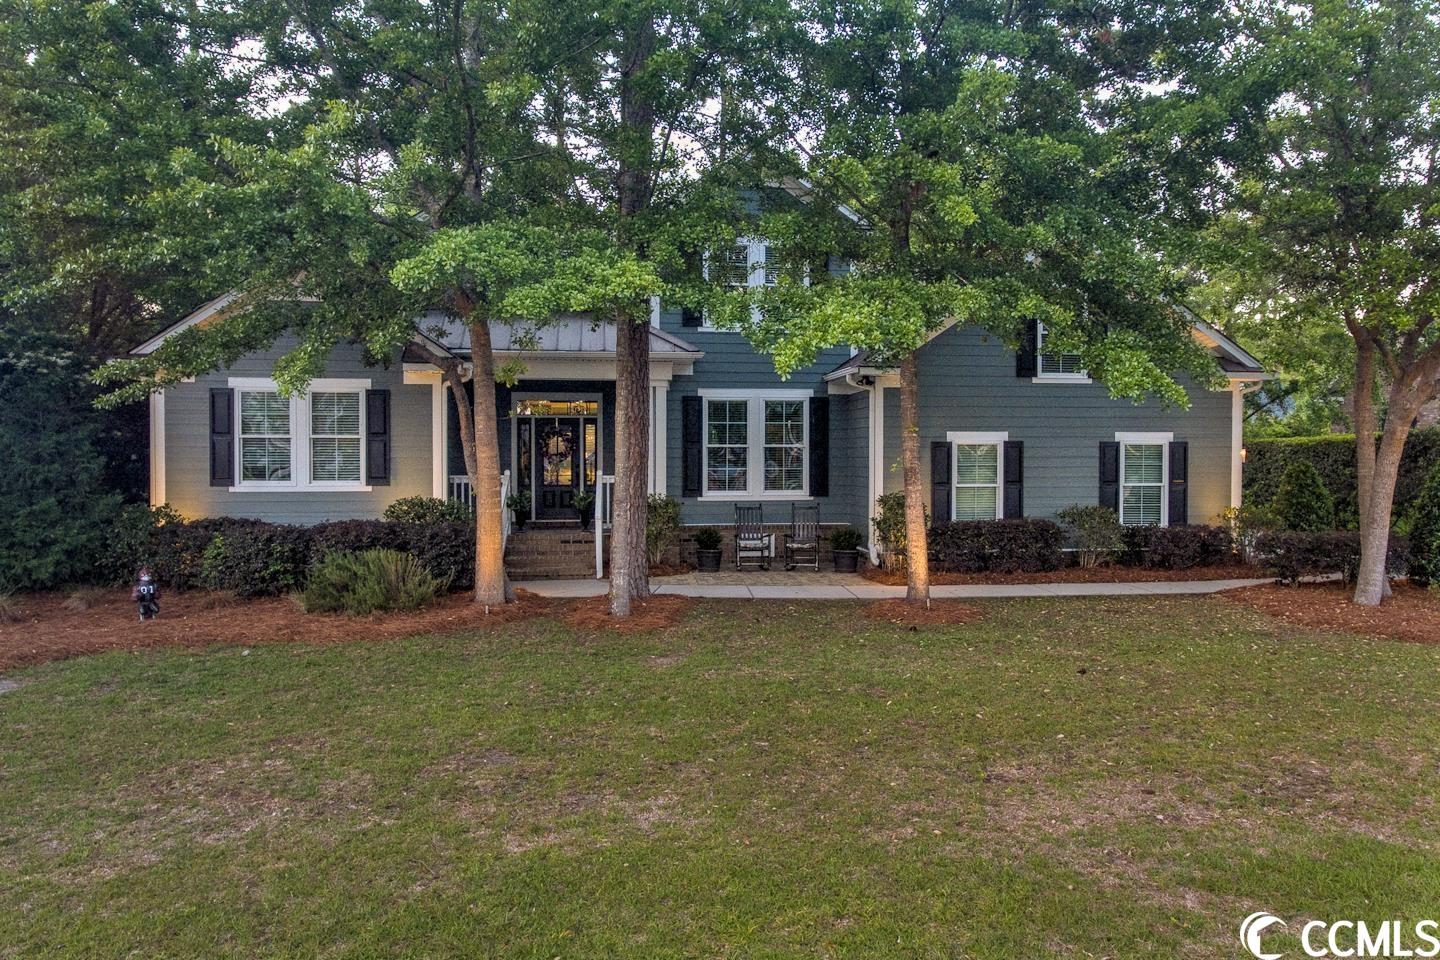 596 Woody Point Dr. Murrells Inlet, SC 29576